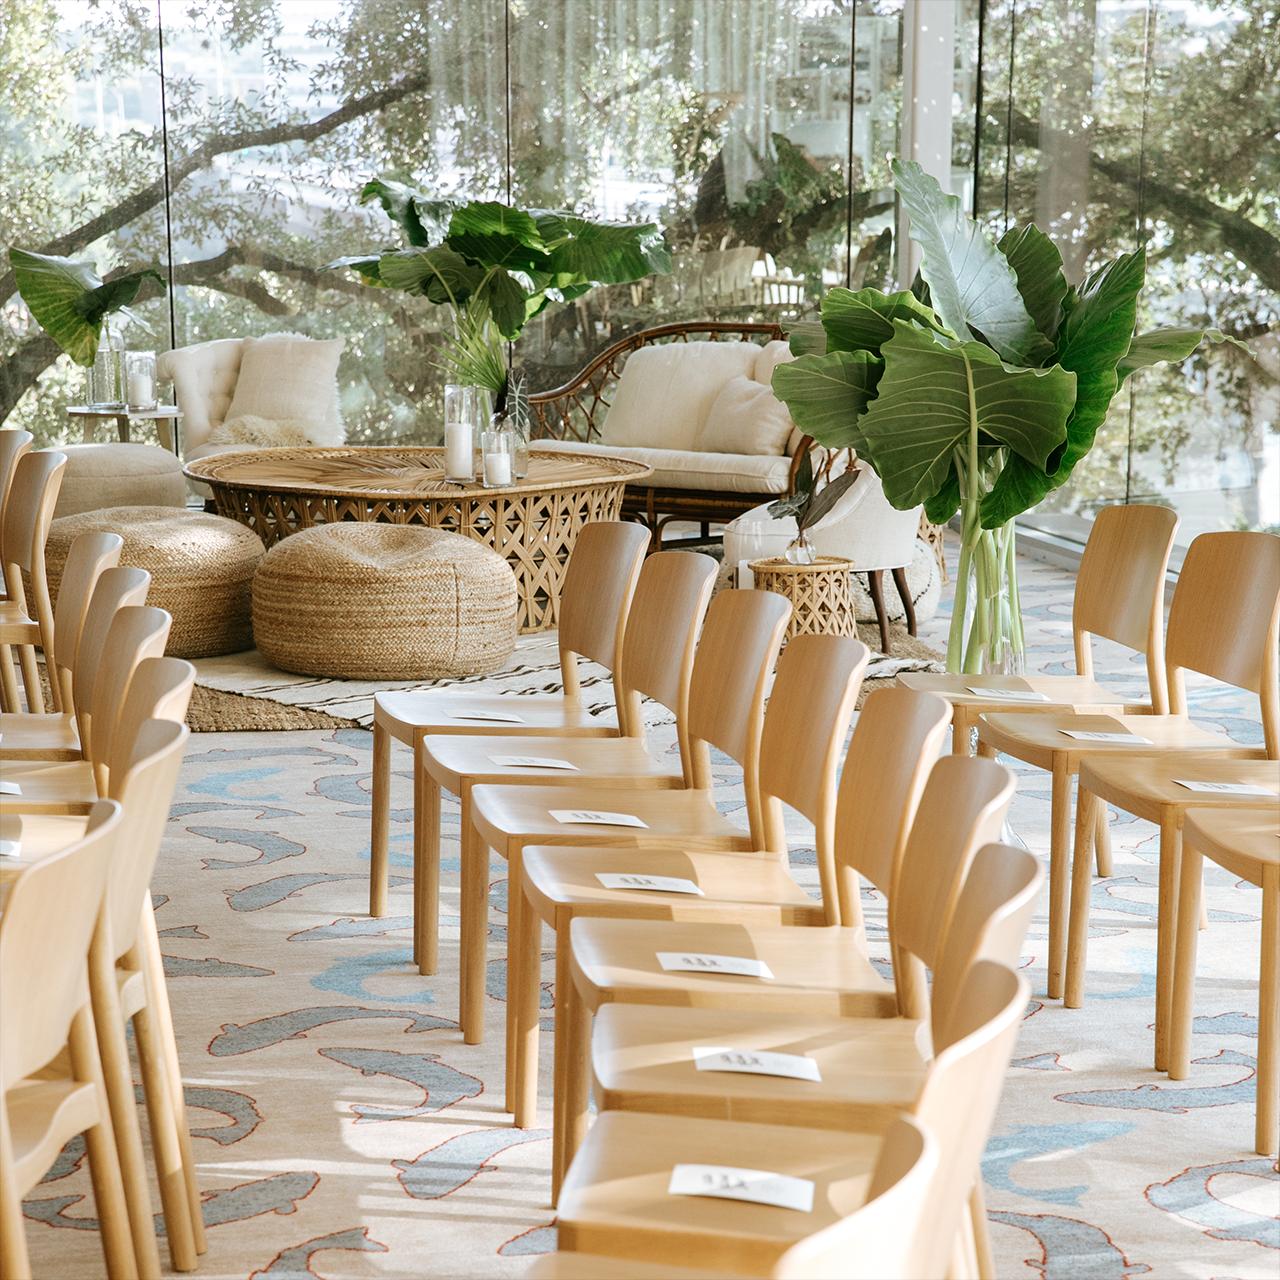 Wooden chairs in rows prepared for a wedding